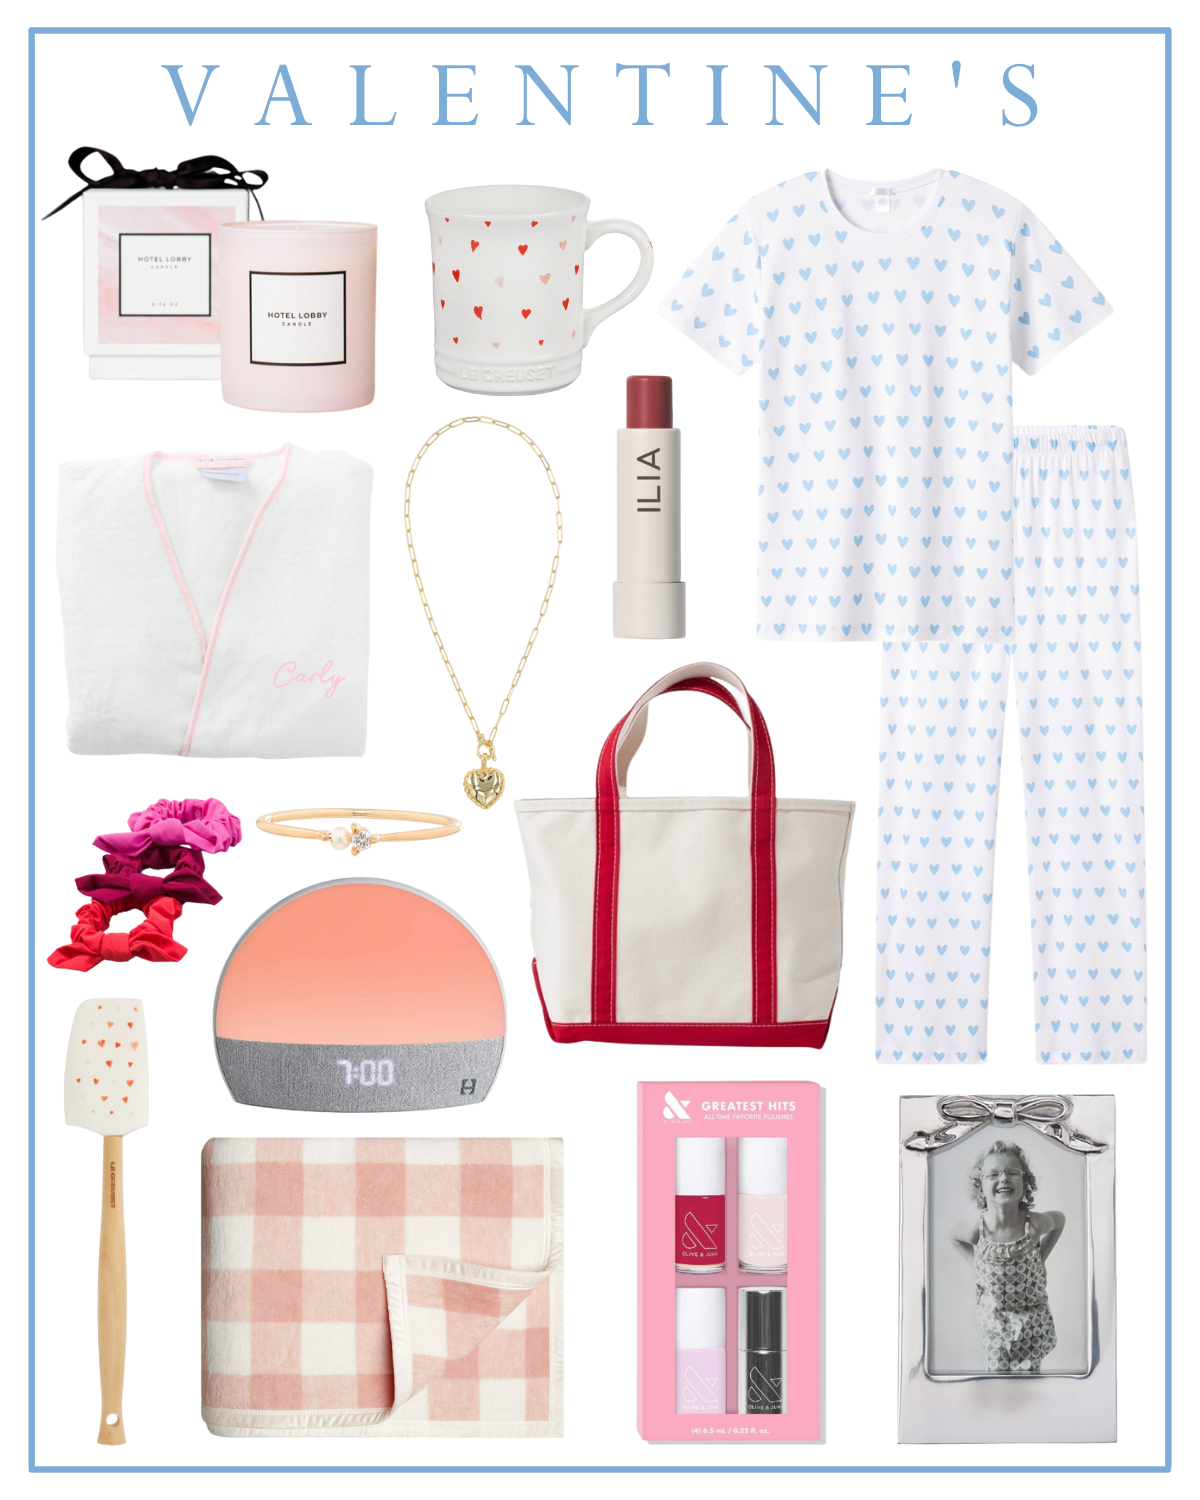 valentine's day gift ideas for her from hotel lobby candle, ilia, lake pajamas, weezie towels, llbean, hatch, chappywrap, olive and june, hart jewelry, mariposa, le creuset, and catbird